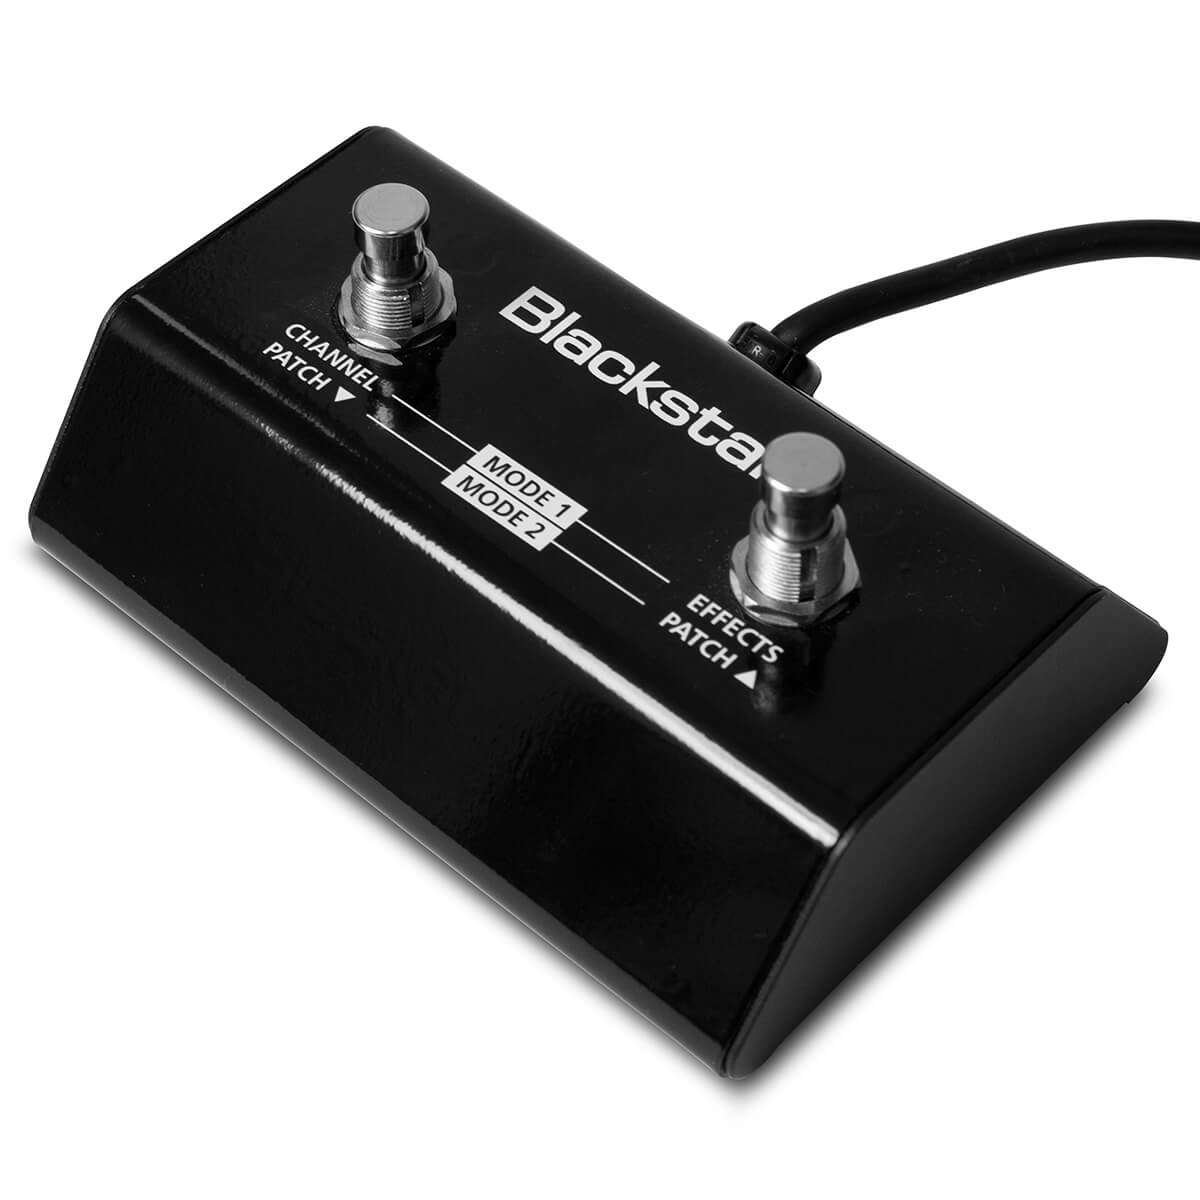 Blackstar Amps footswitch